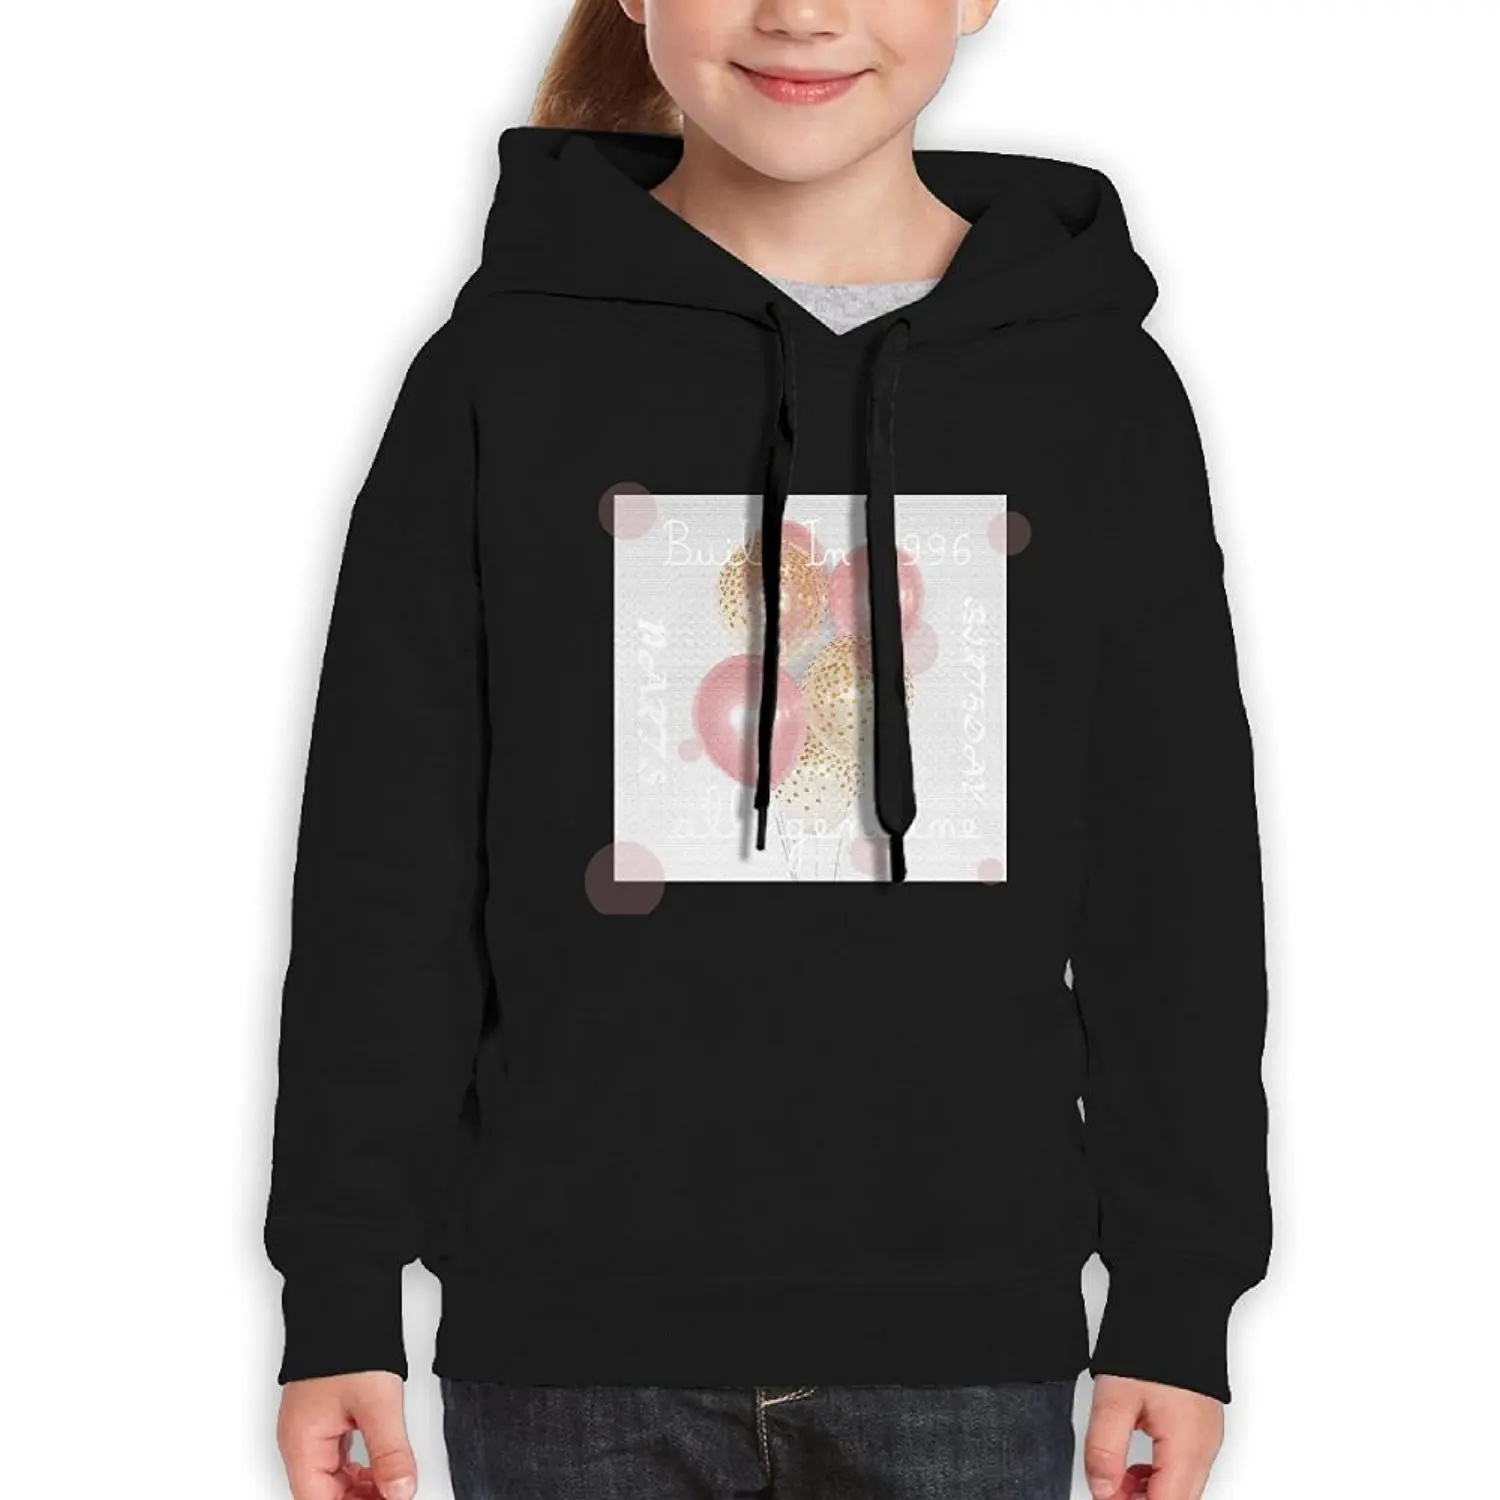 cool hoodie designs for guys